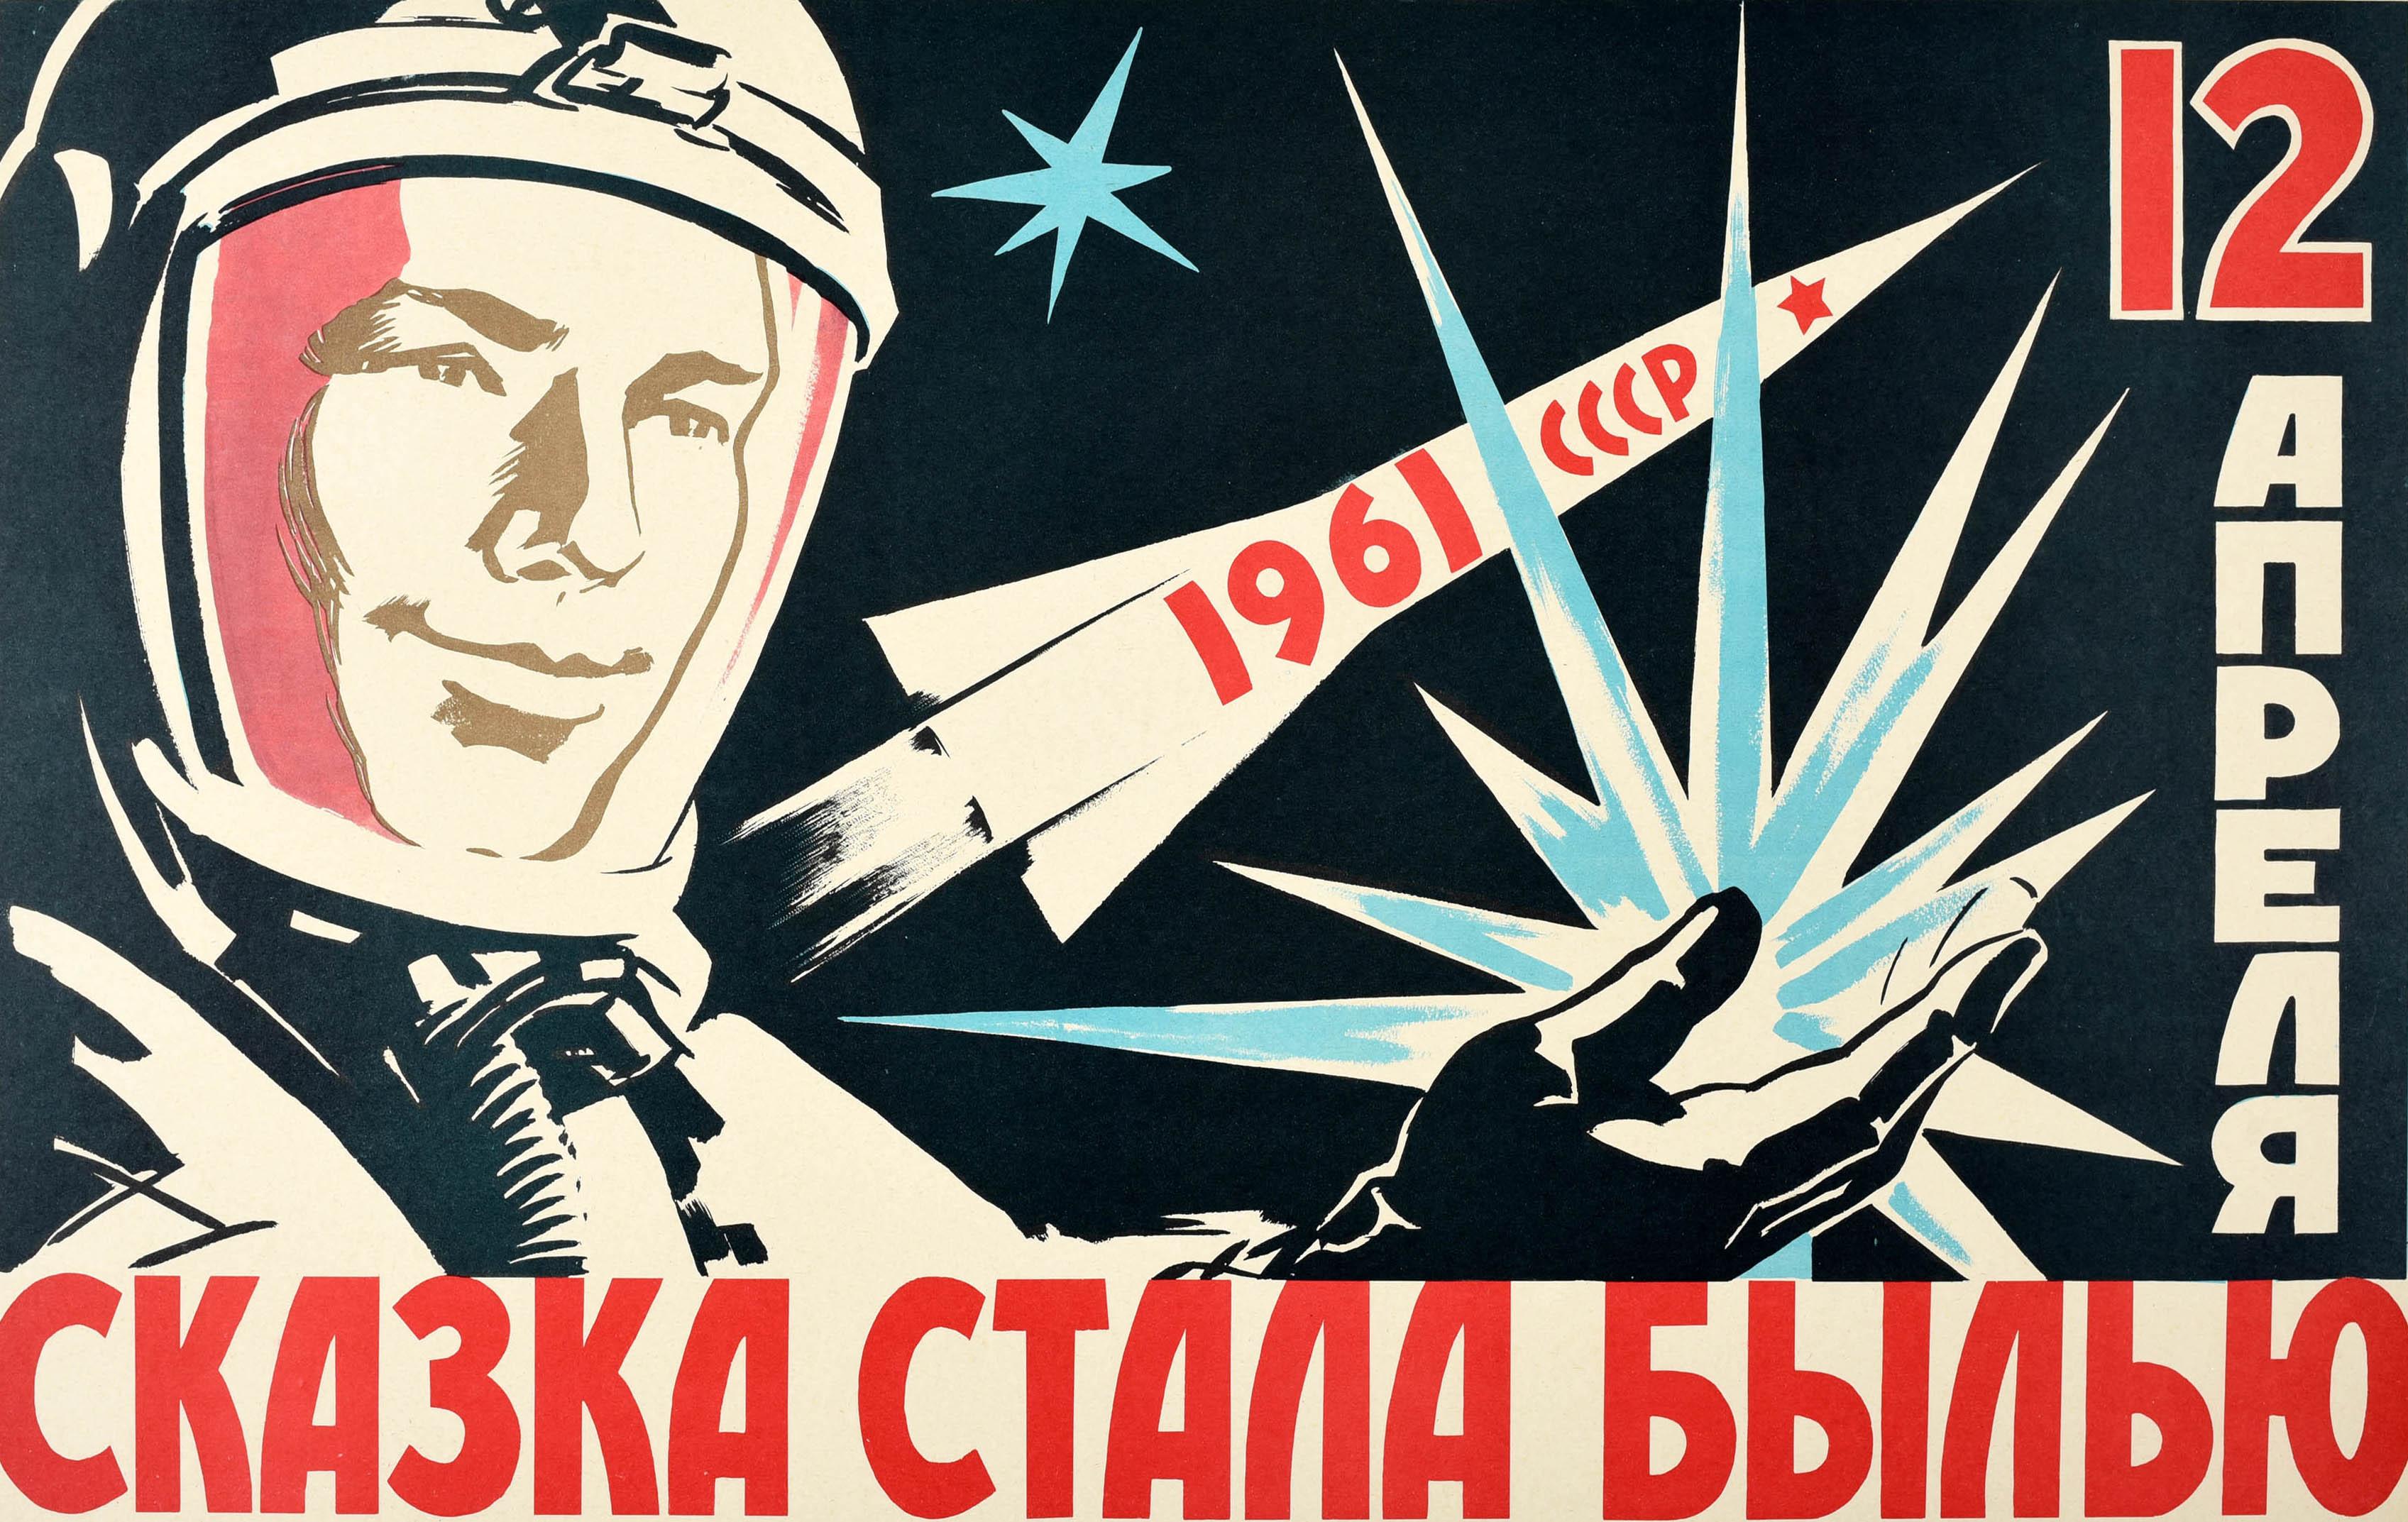 Original vintage Soviet propaganda poster - The Fairy Tale Came True 12 April 1961 - featuring dynamic artwork against a black space background of Yuri Gagarin (Yuri Alekseyevich Gagarin; 1934-1968), the Soviet pilot and cosmonaut who was the first